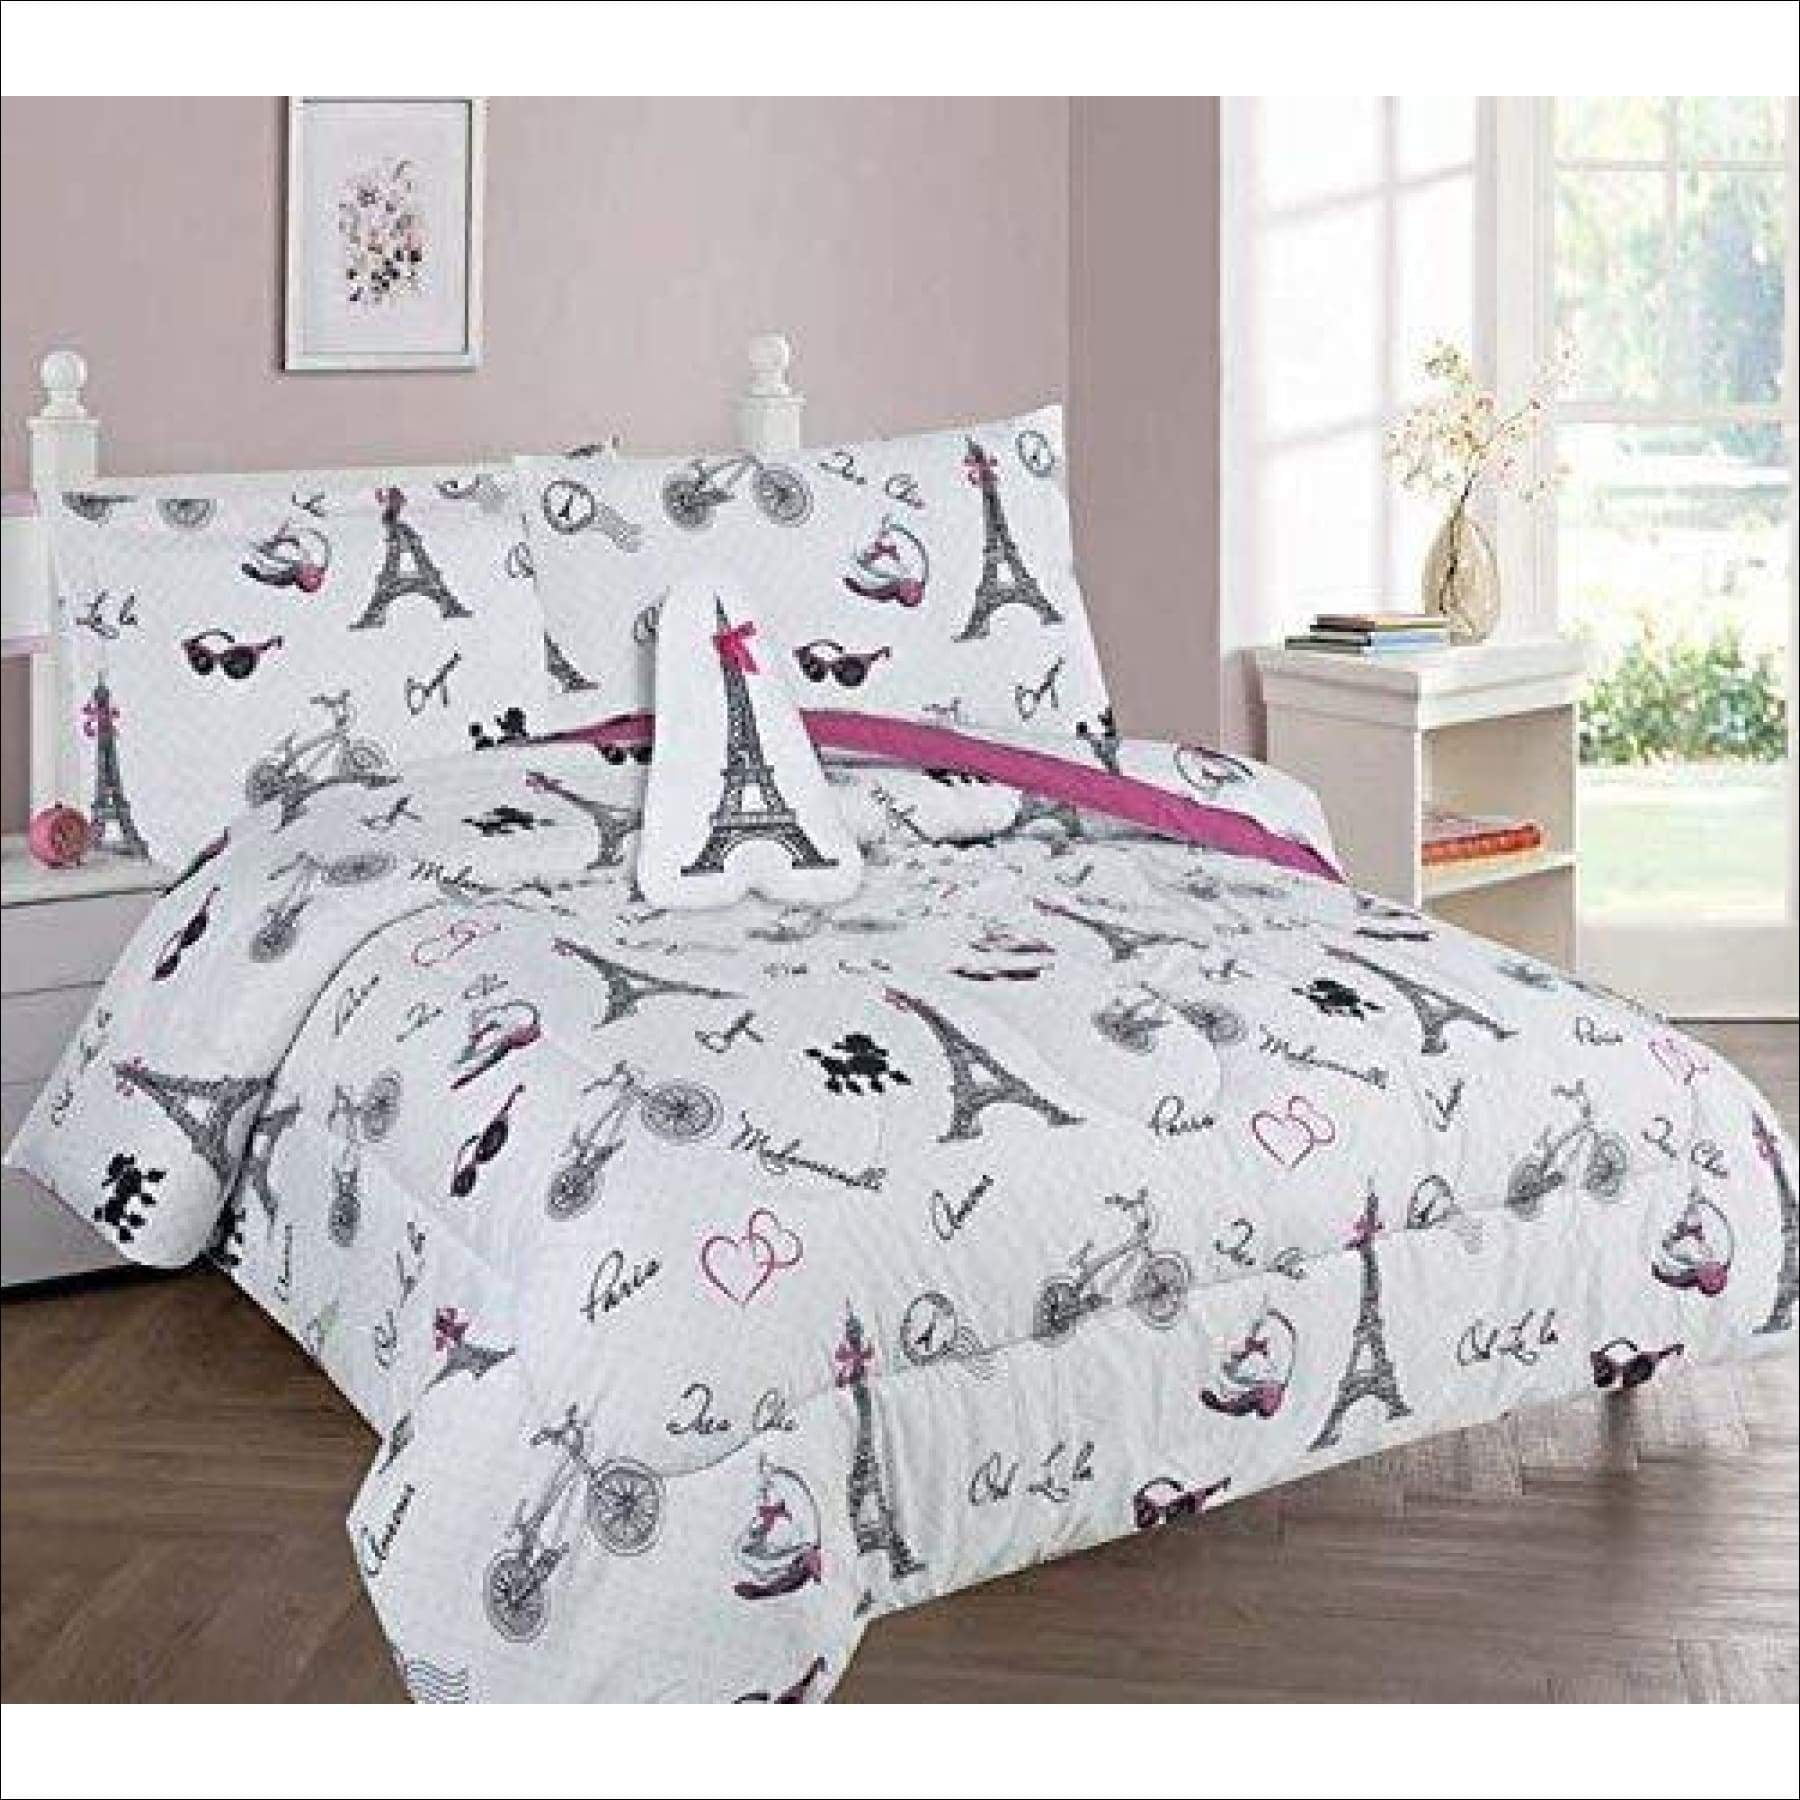 Paris Eiffel Tower Design, Twin Bed Sheets Sets Clearance